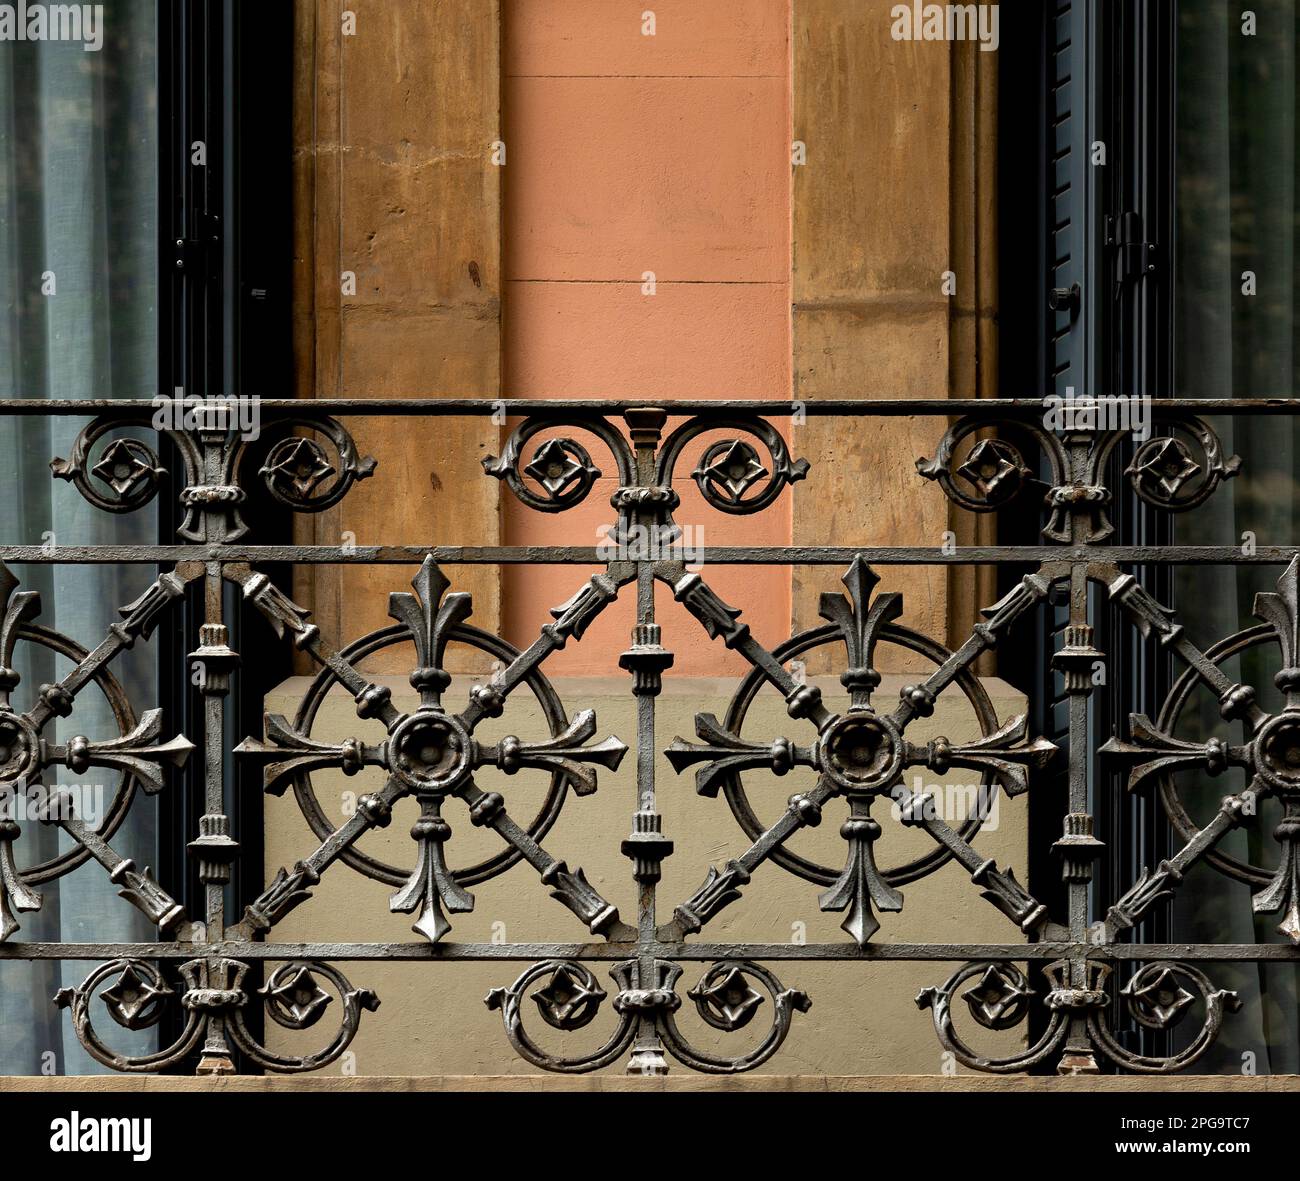 Shot in color detail on the facade of this historic building representing some character, animal or flower. Set at Eixample, Barcelona, Catalunya, Stock Photo